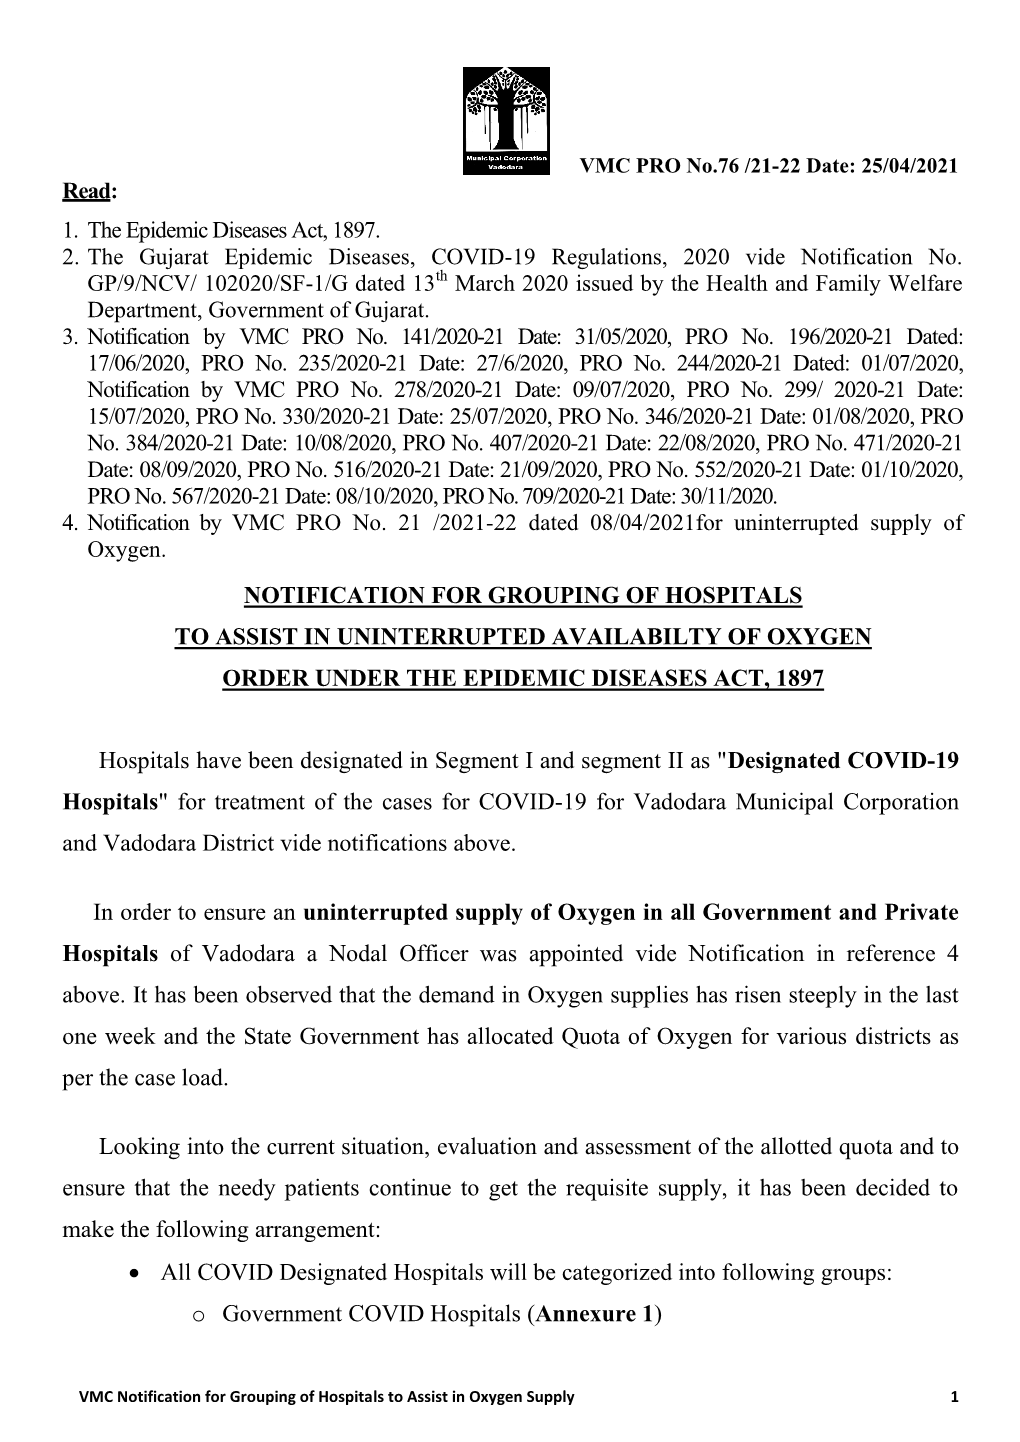 VMC Oxygen Grouping of Hospitals Notification